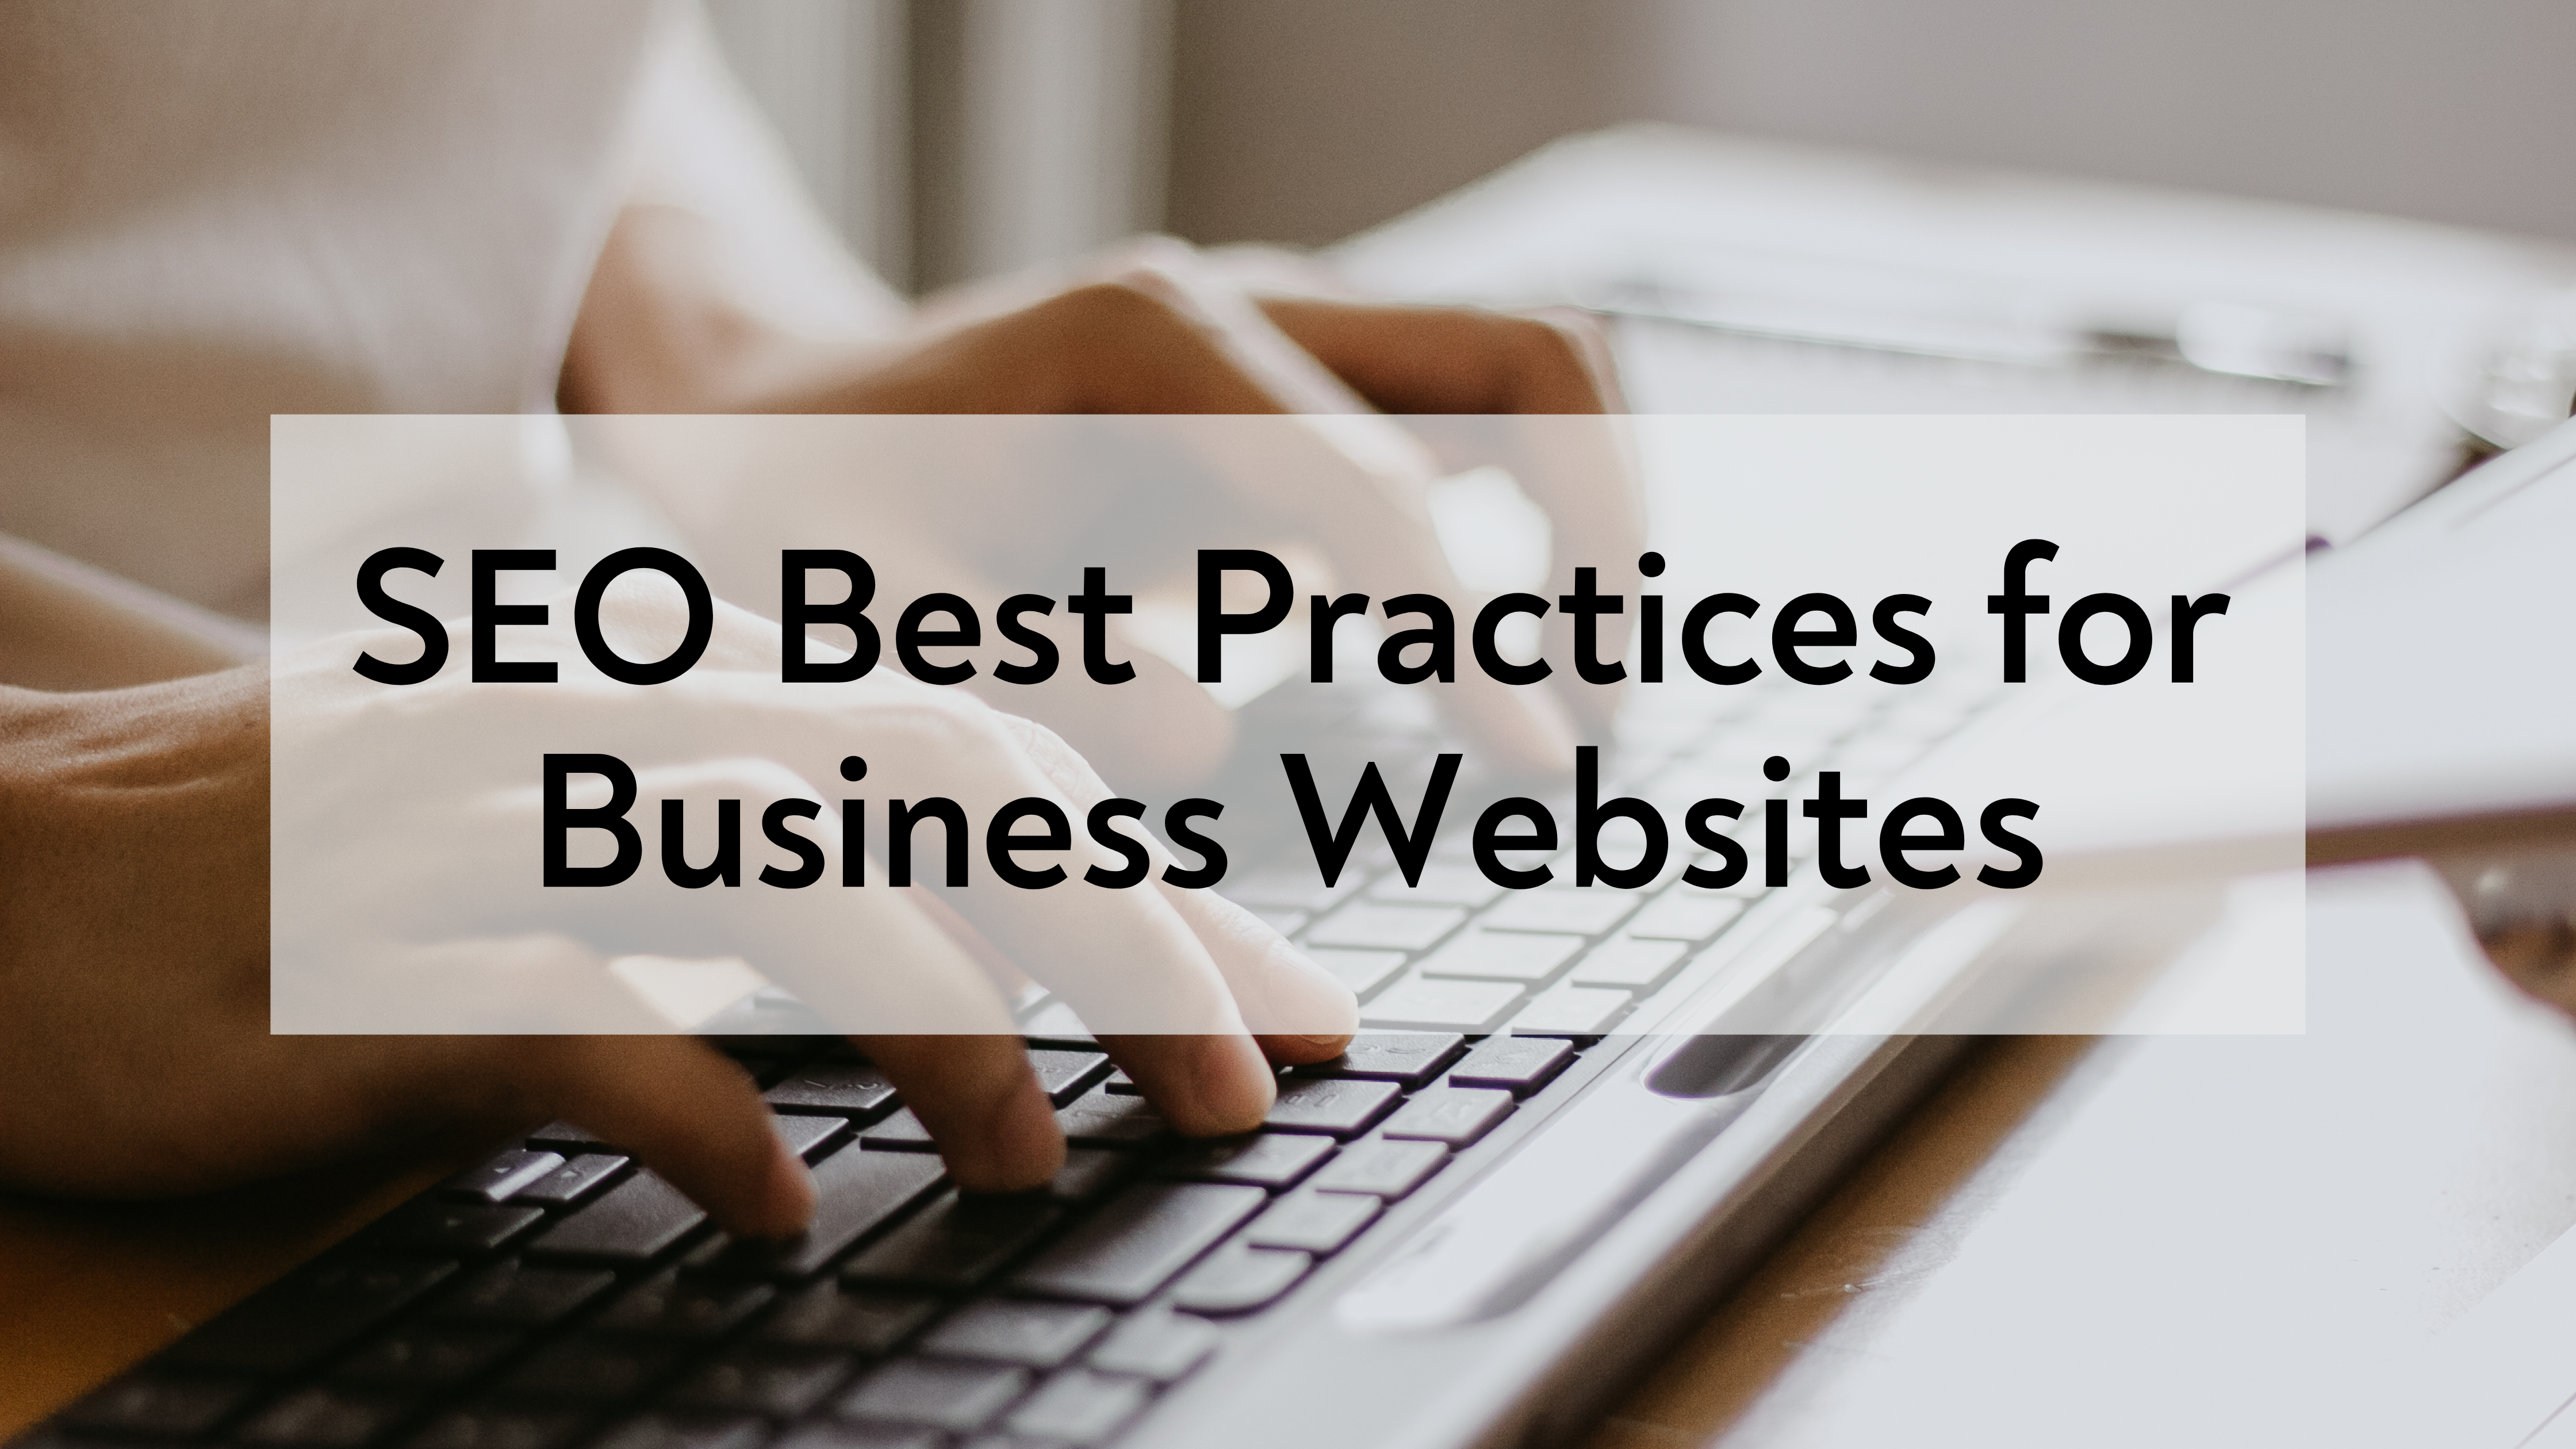 SEO Best Practices for Business Websites